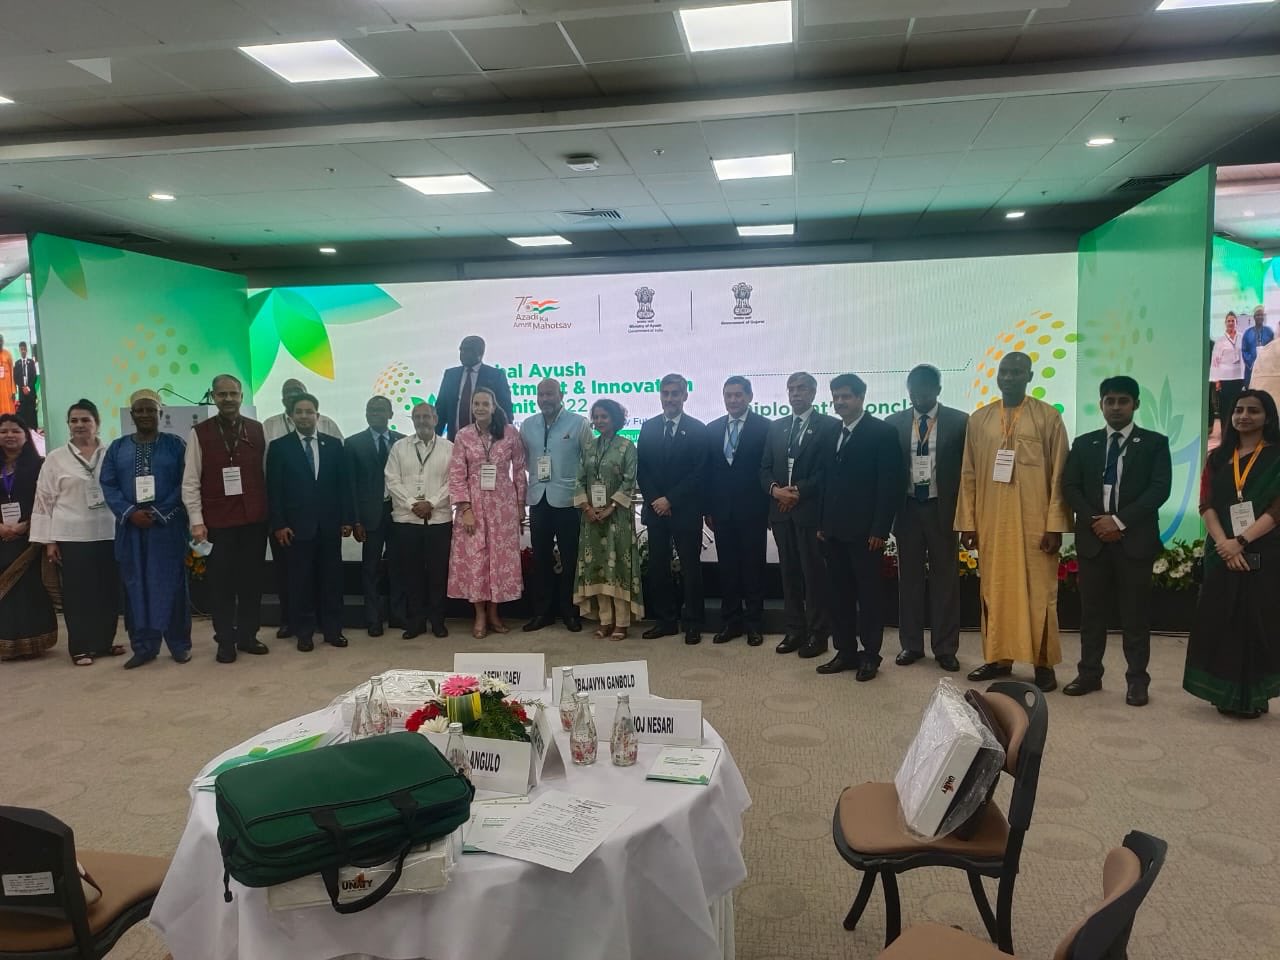 First ever Global AYUSH Investment & Innovation Summit in Gandhinagar concludes on high note.  Rs 9,000 crore investments proposed